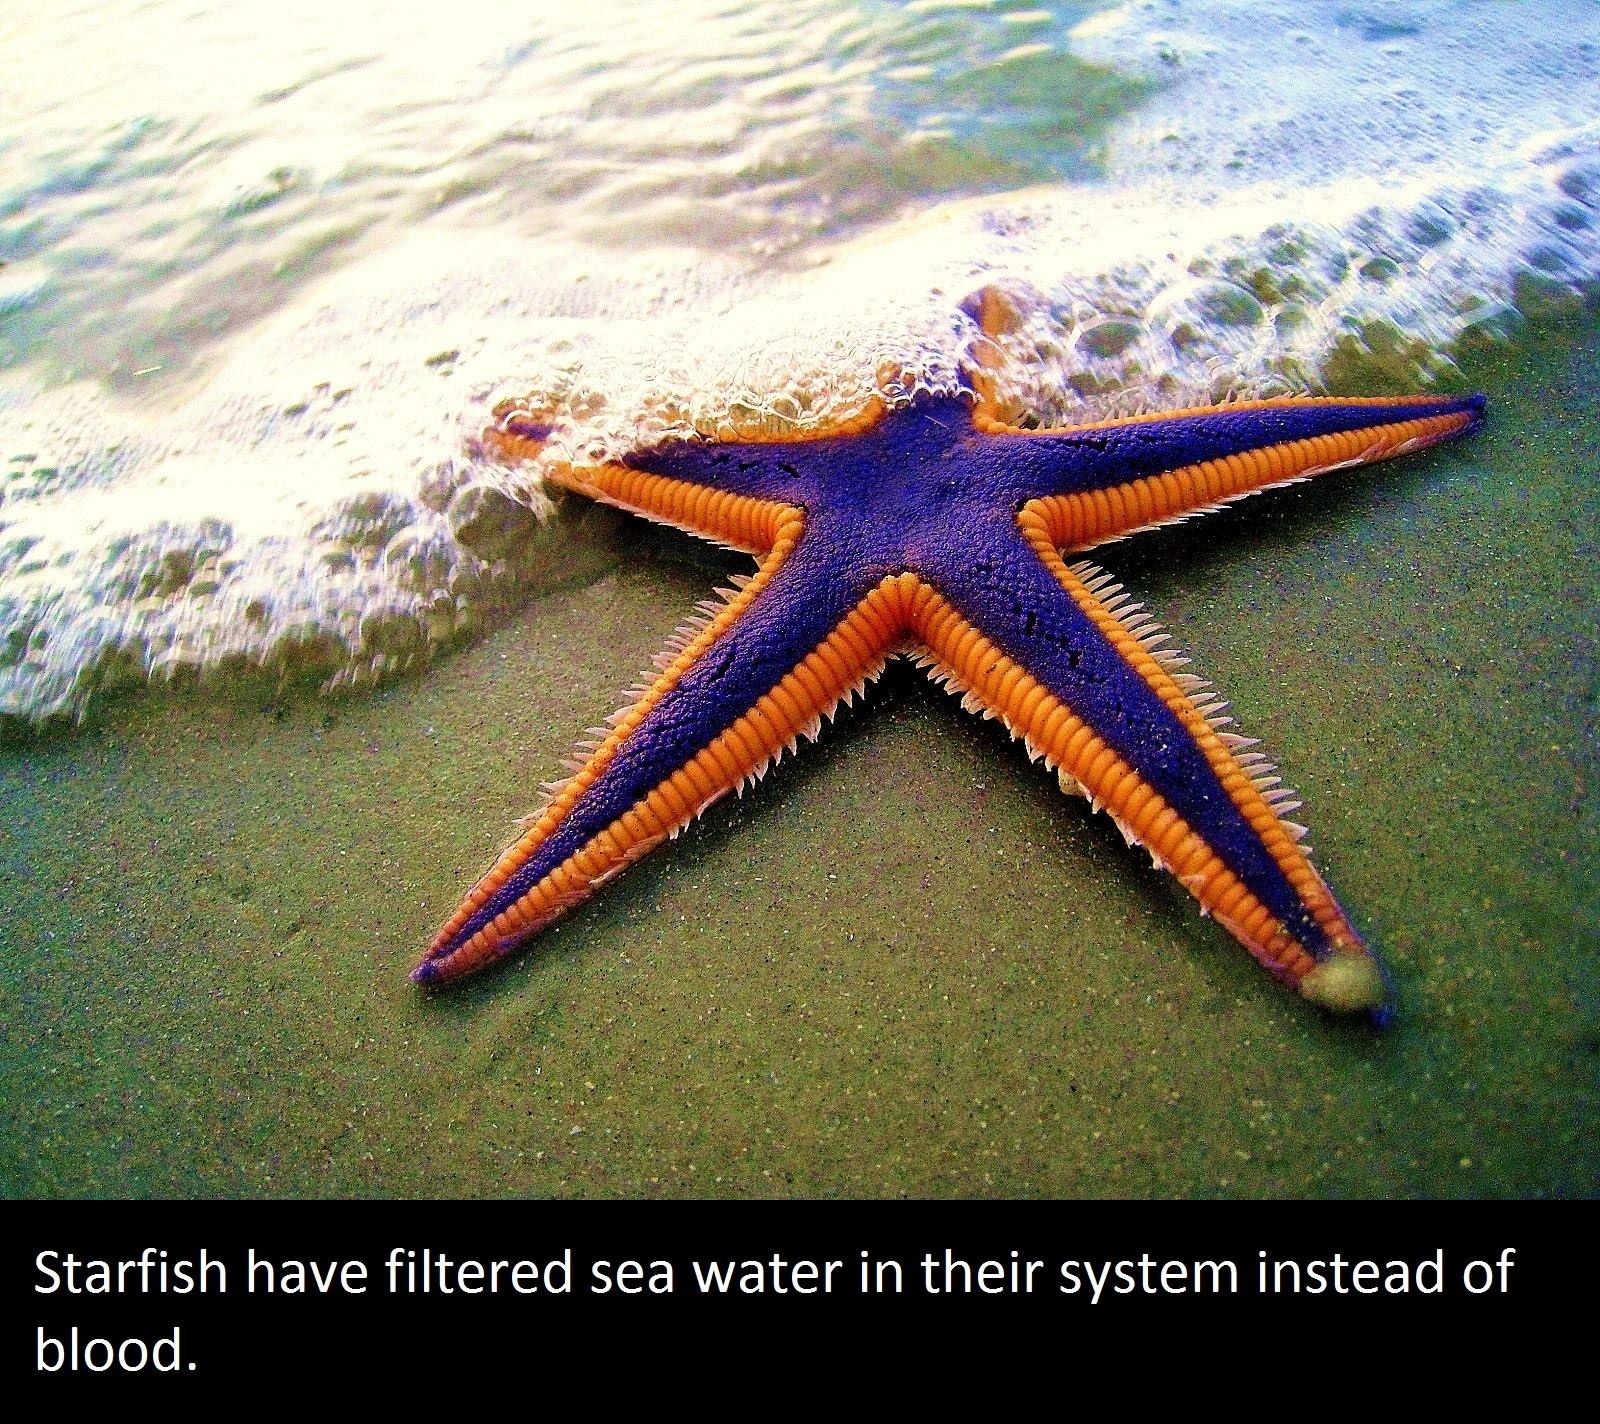 sea star - Starfish have filtered sea water in their system instead of blood.